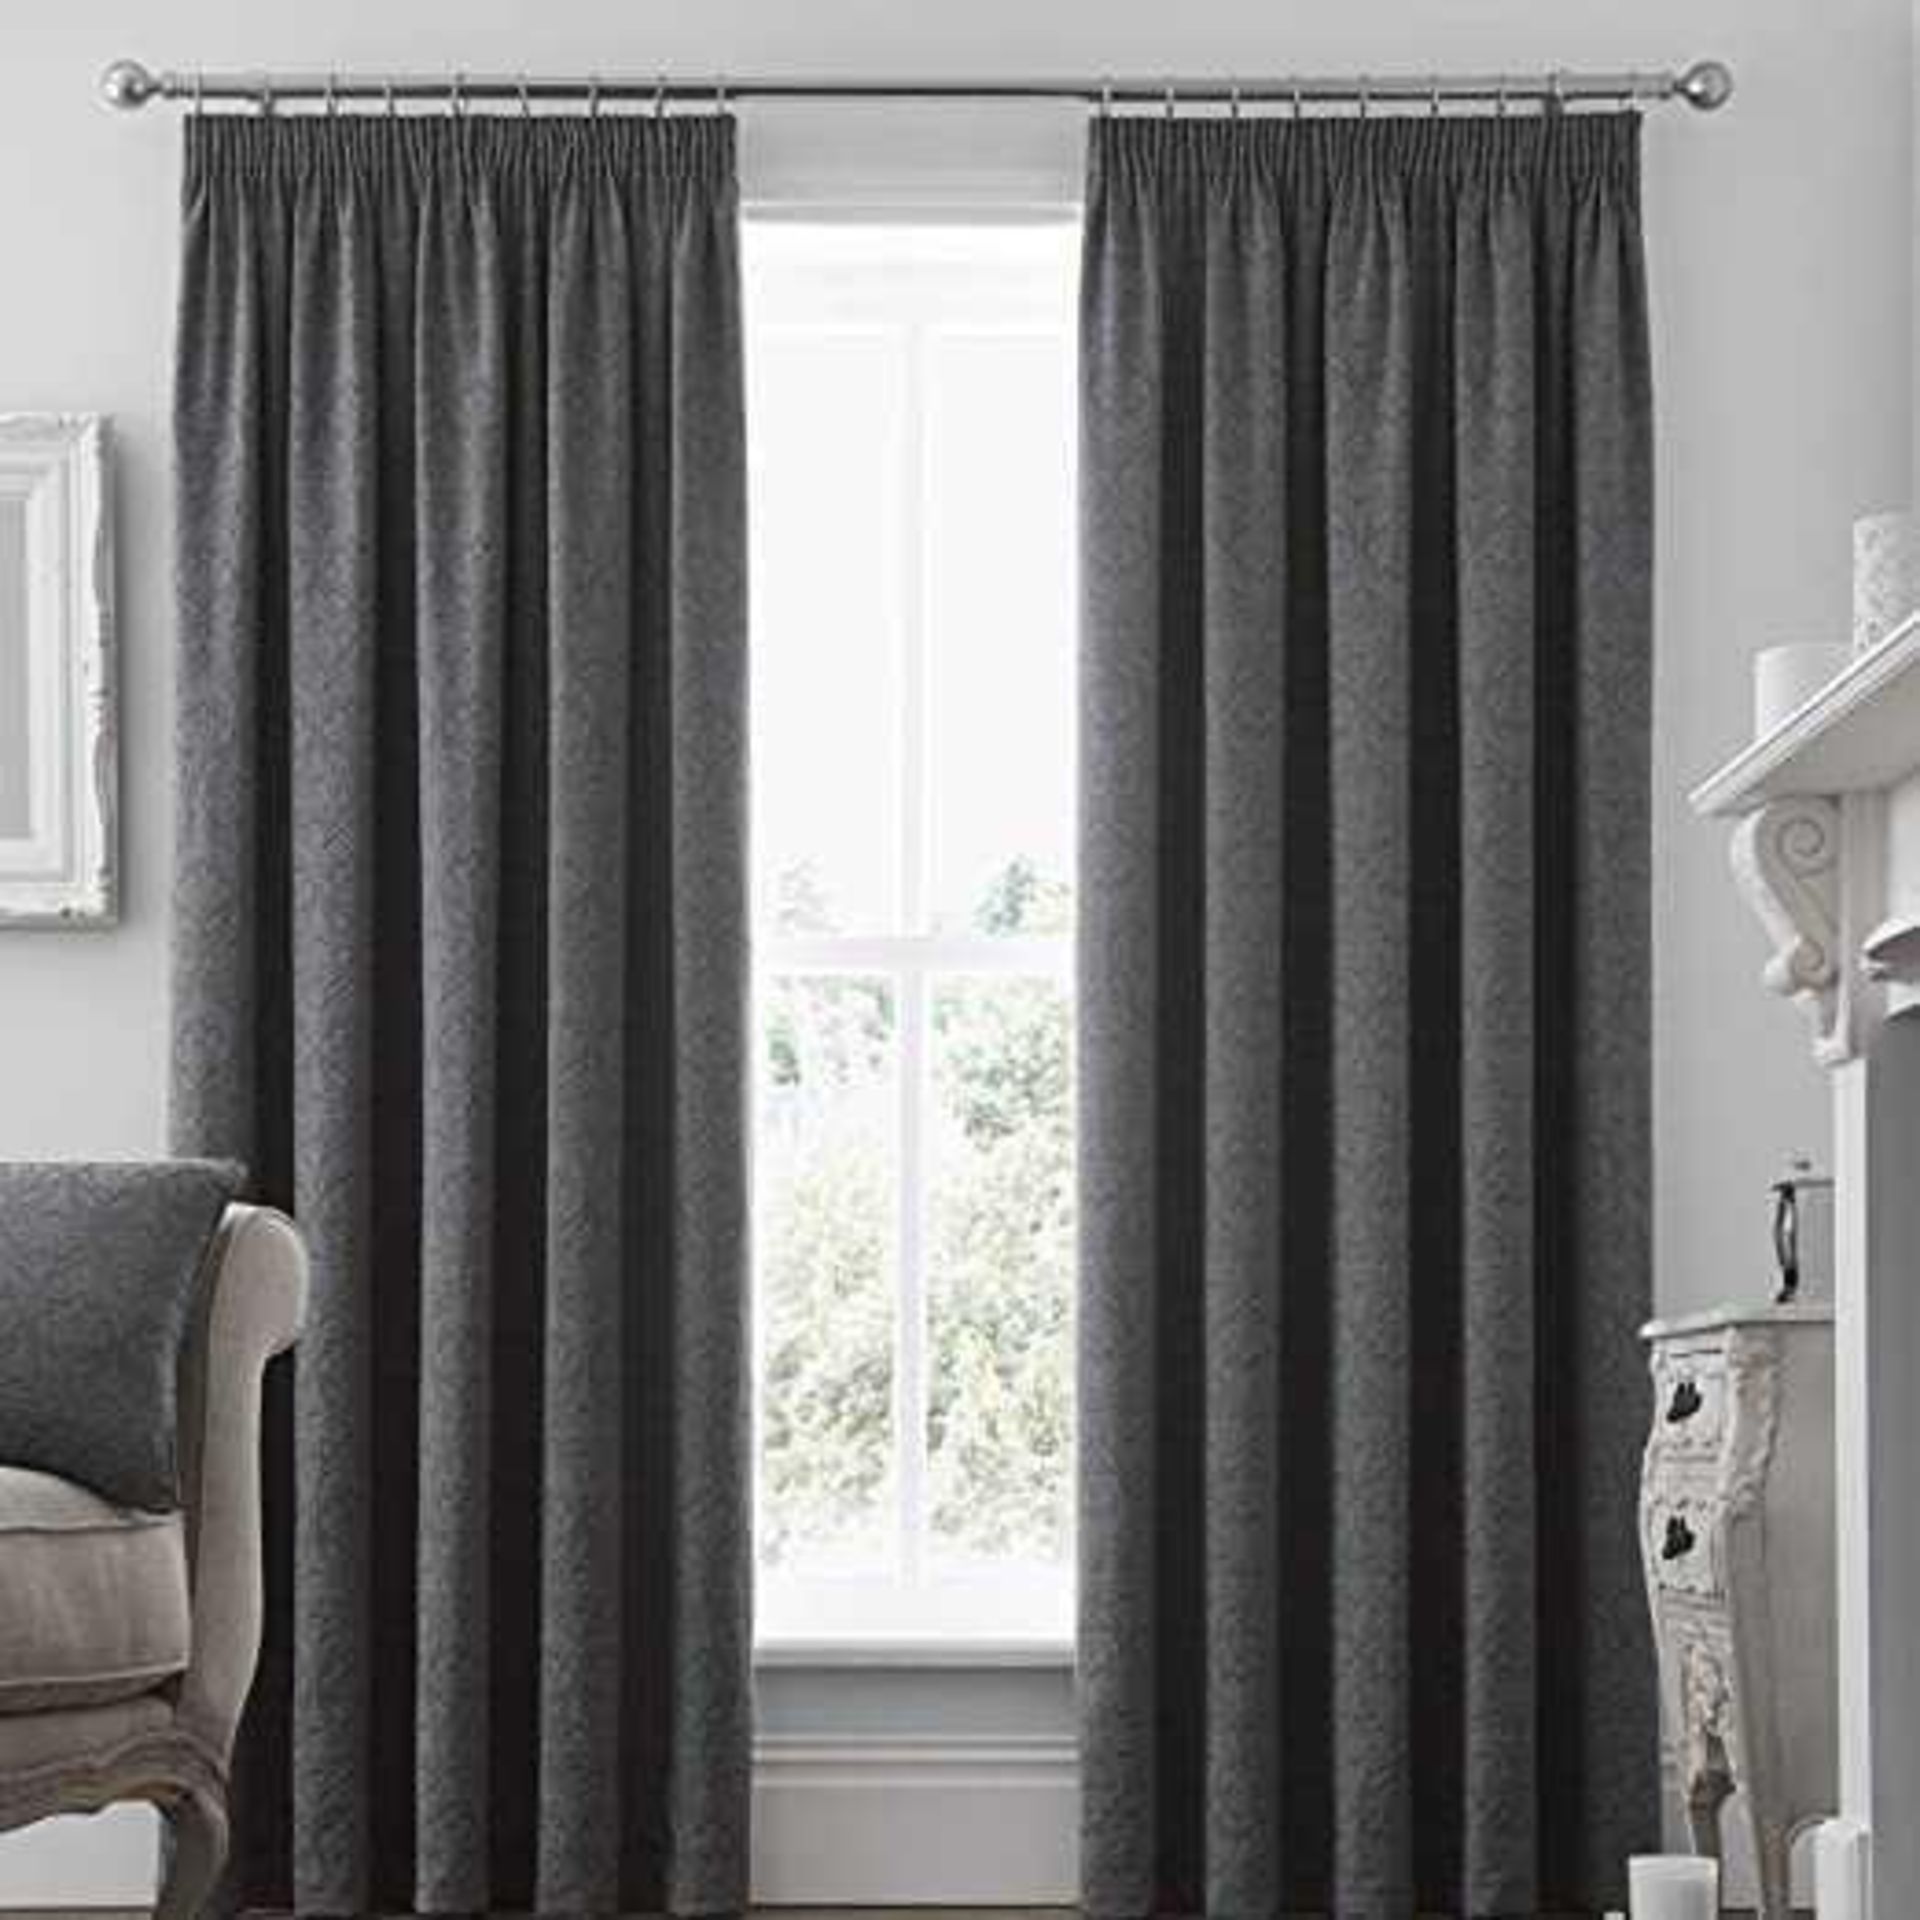 Combined Rrp £175 Lot To Contain 3 Assorted Curtains - Image 5 of 8